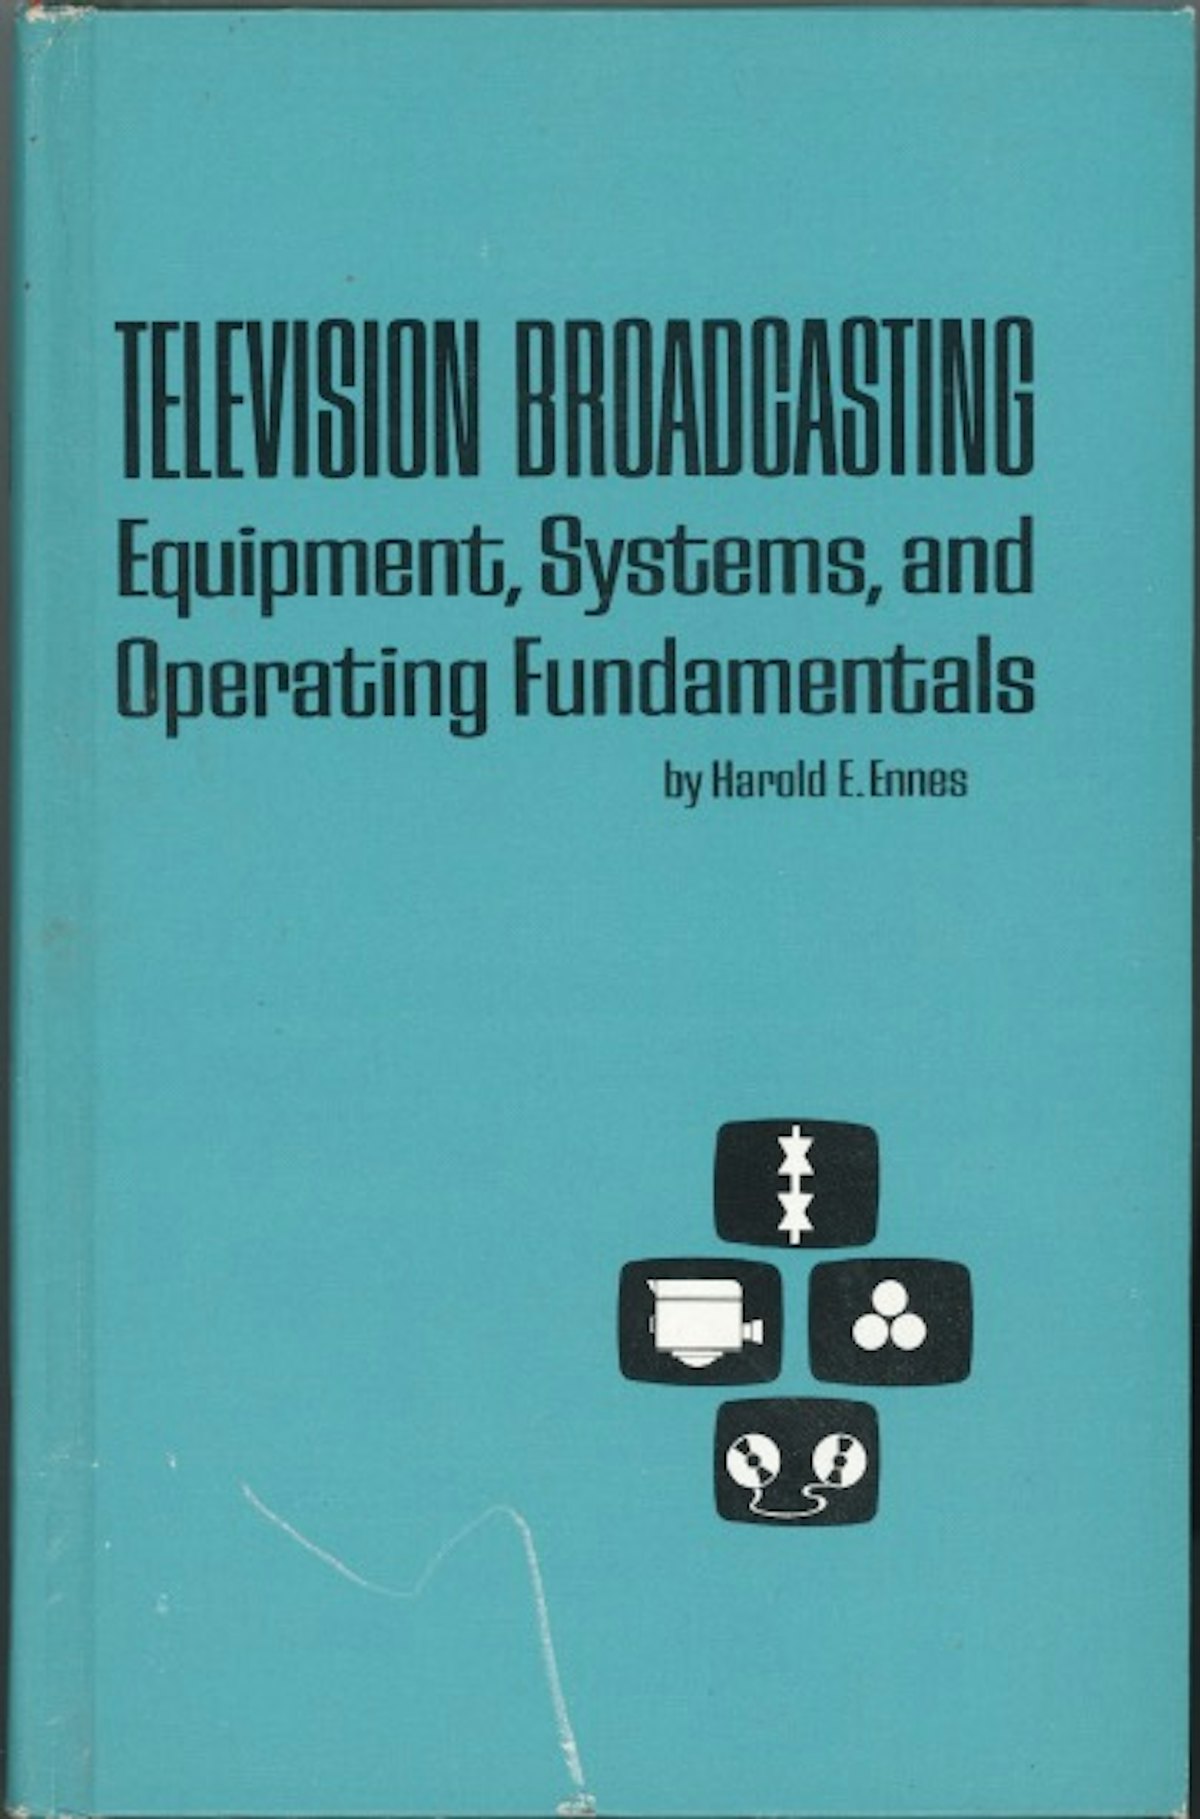 Television Broadcasting Equipment, Systems, and Operating Fundamentals